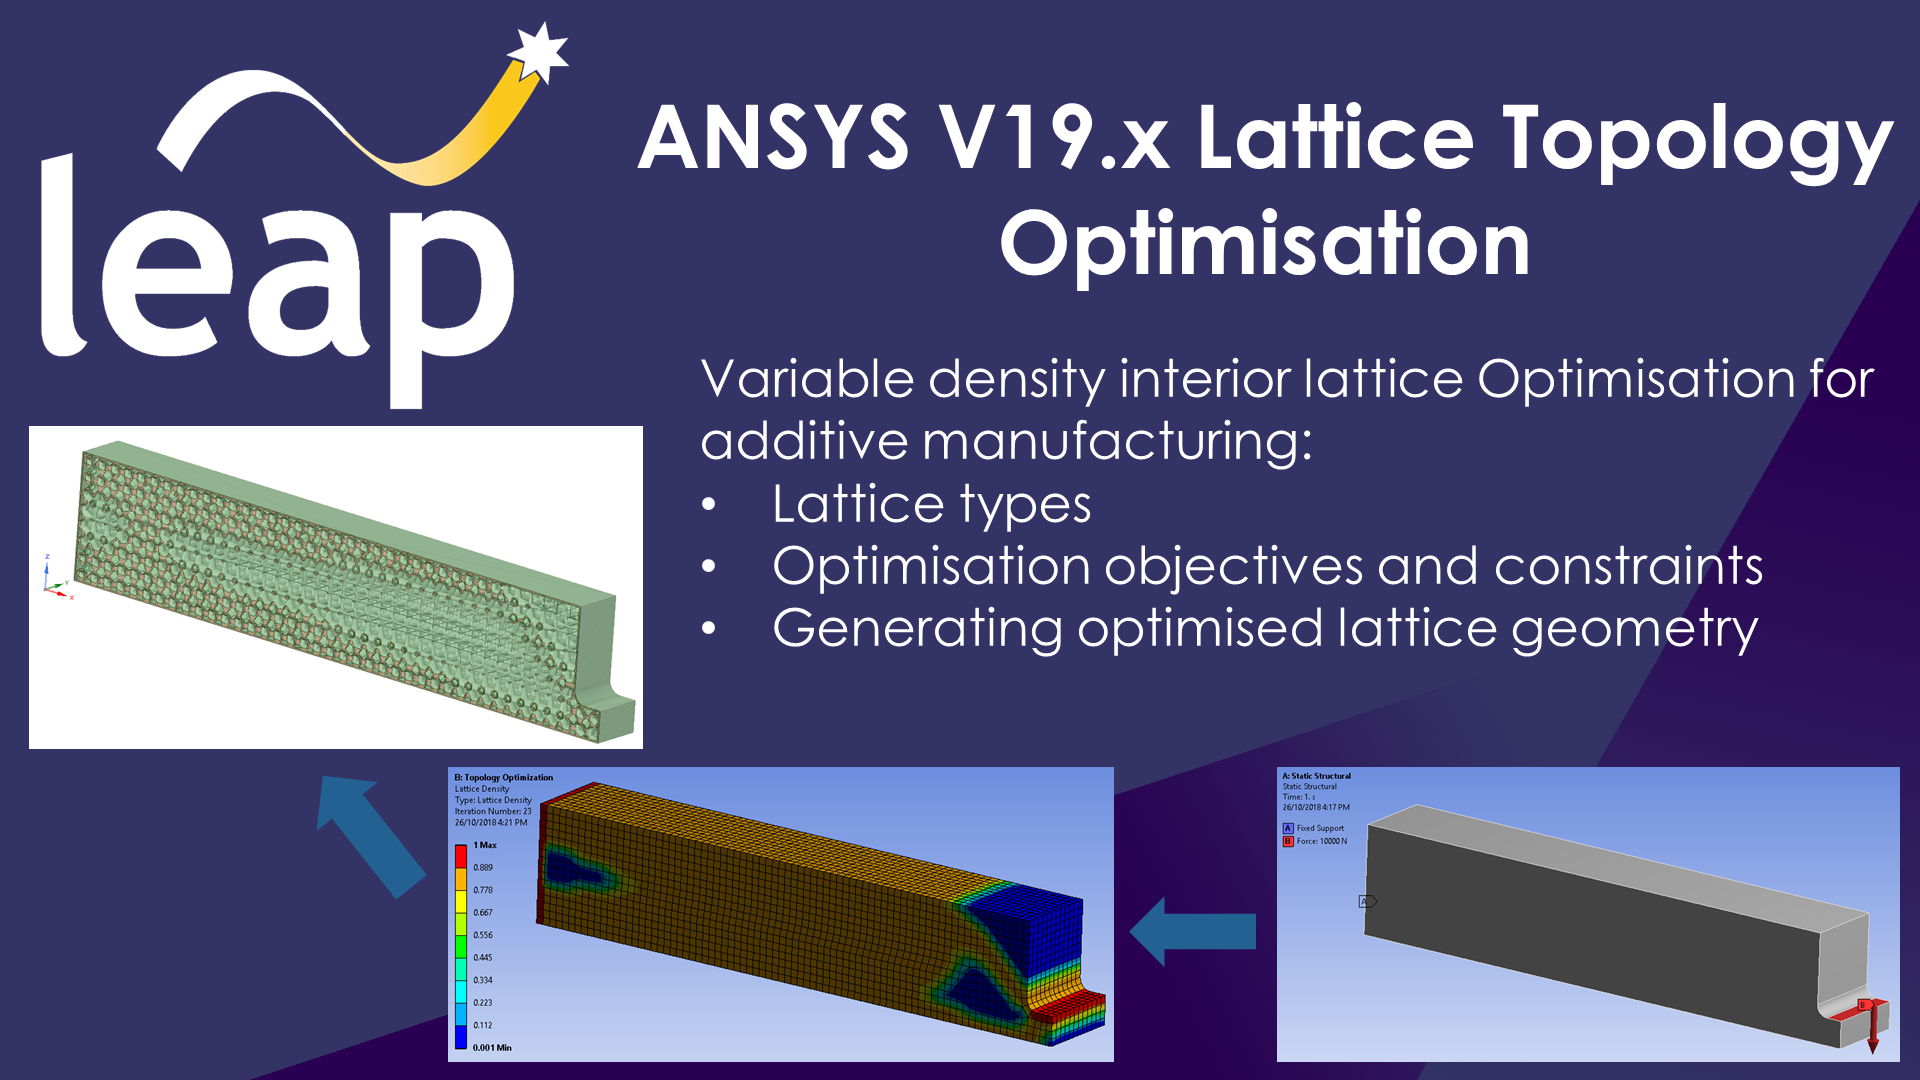 Lattice topology optimisation for additive manufacturing with ANSYS 19x